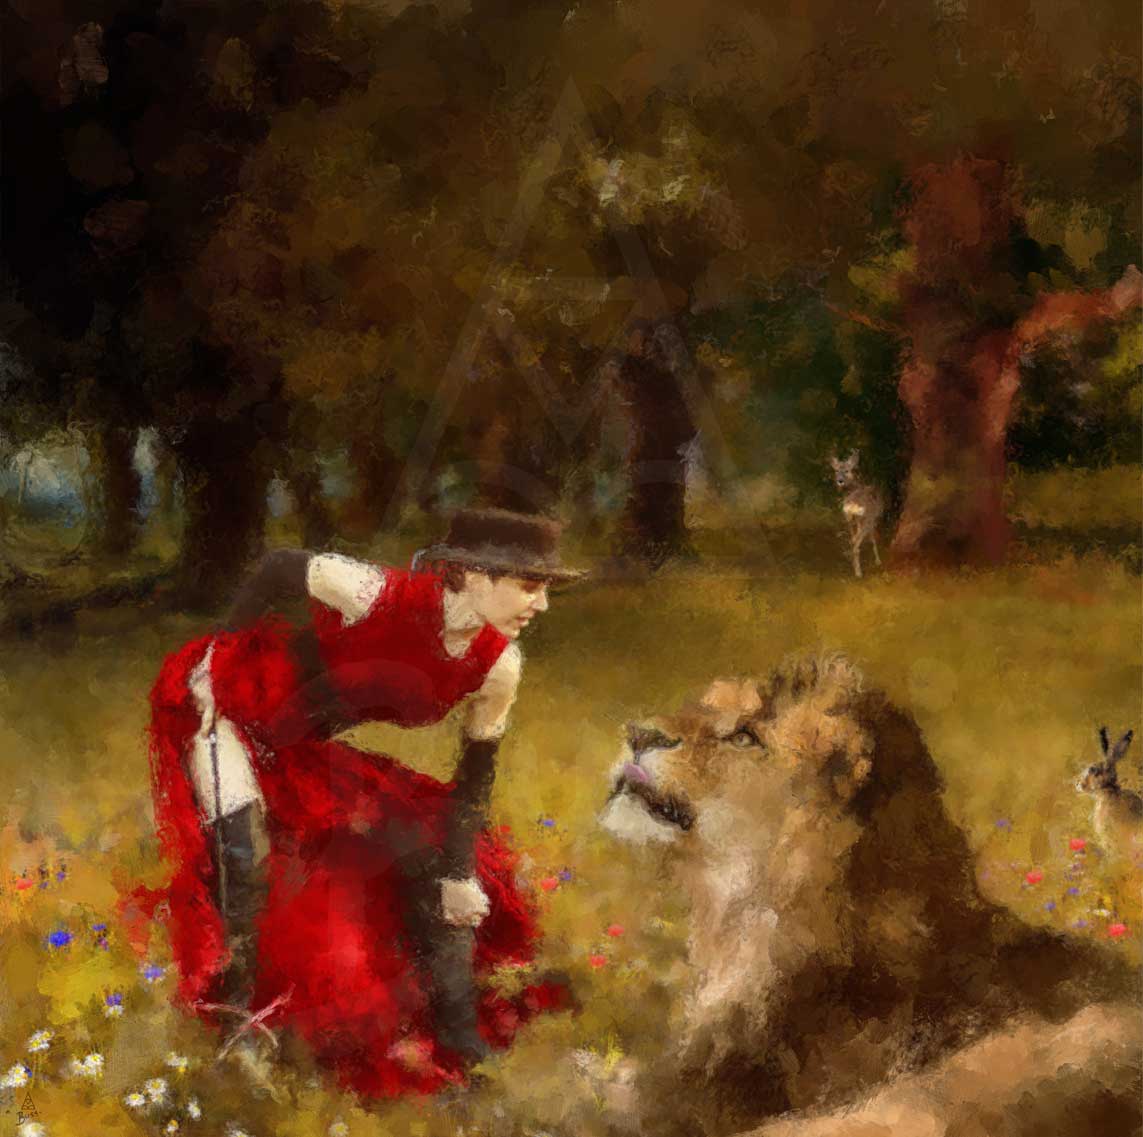 Anna and the Lion by Anna-Marie Buss